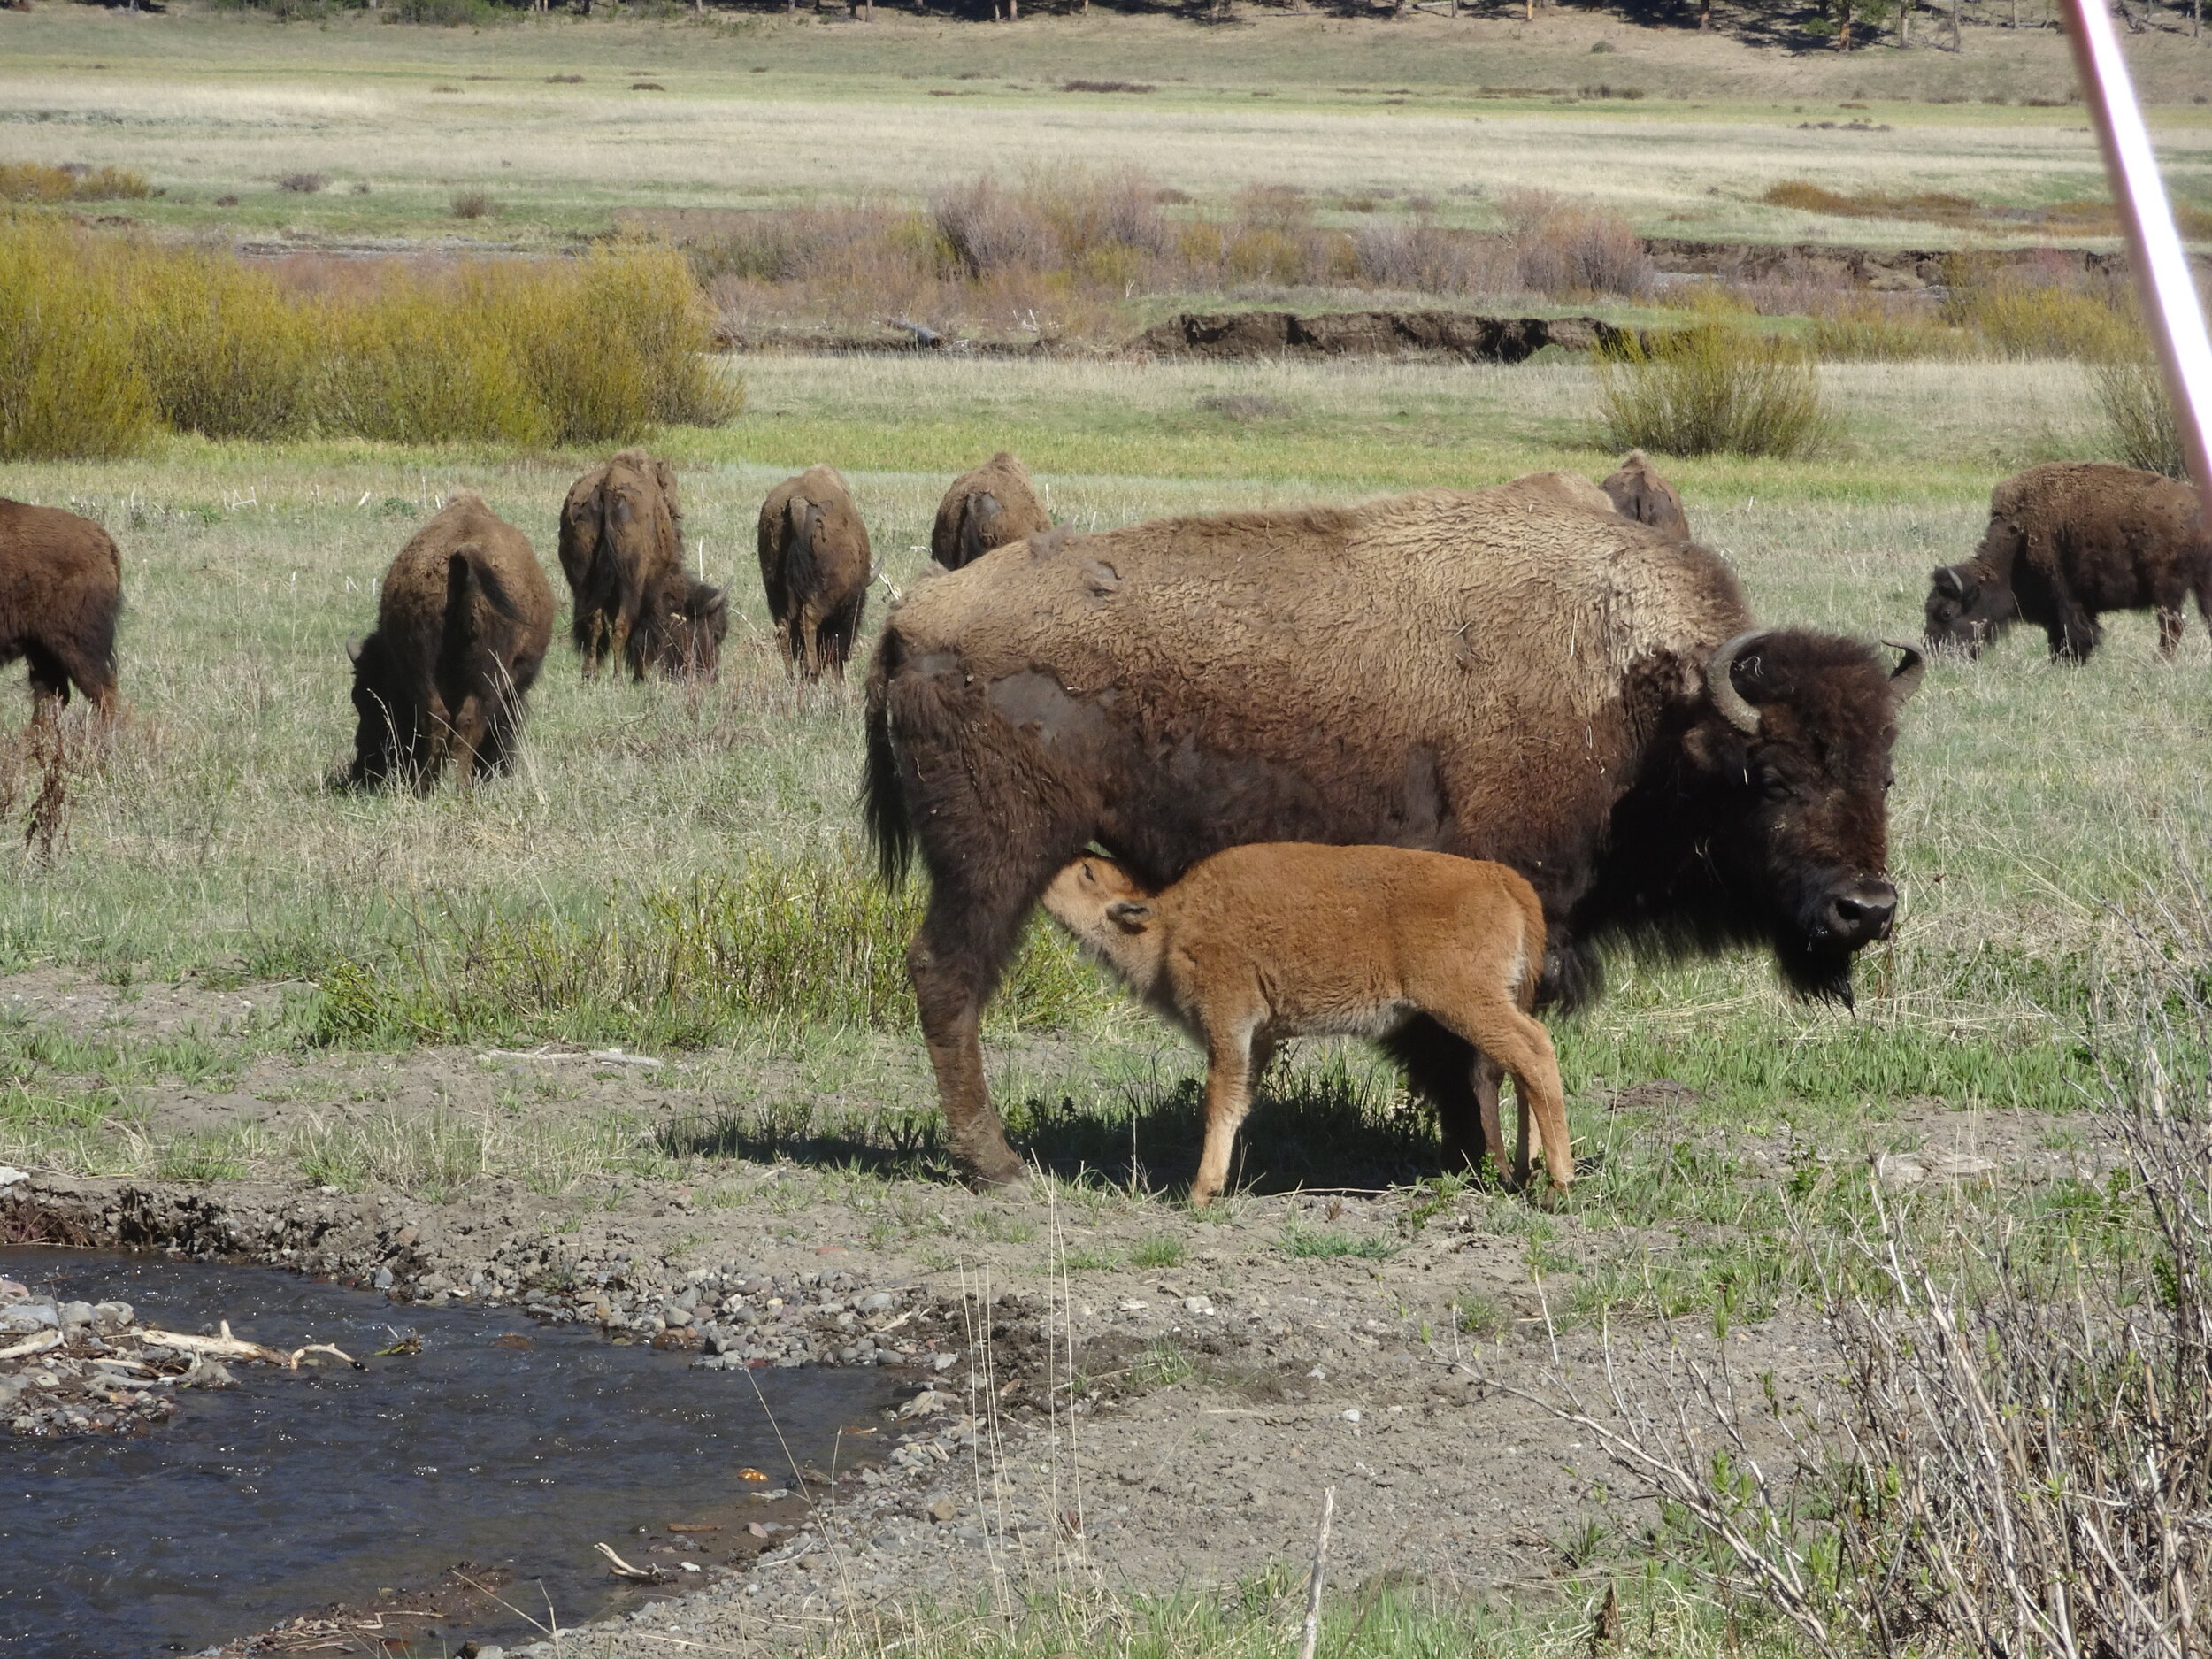 Nursing Bison in Lamar Valley, Yellowstone National Park.  Photo by Karen Boudreaux, May 29, 2021